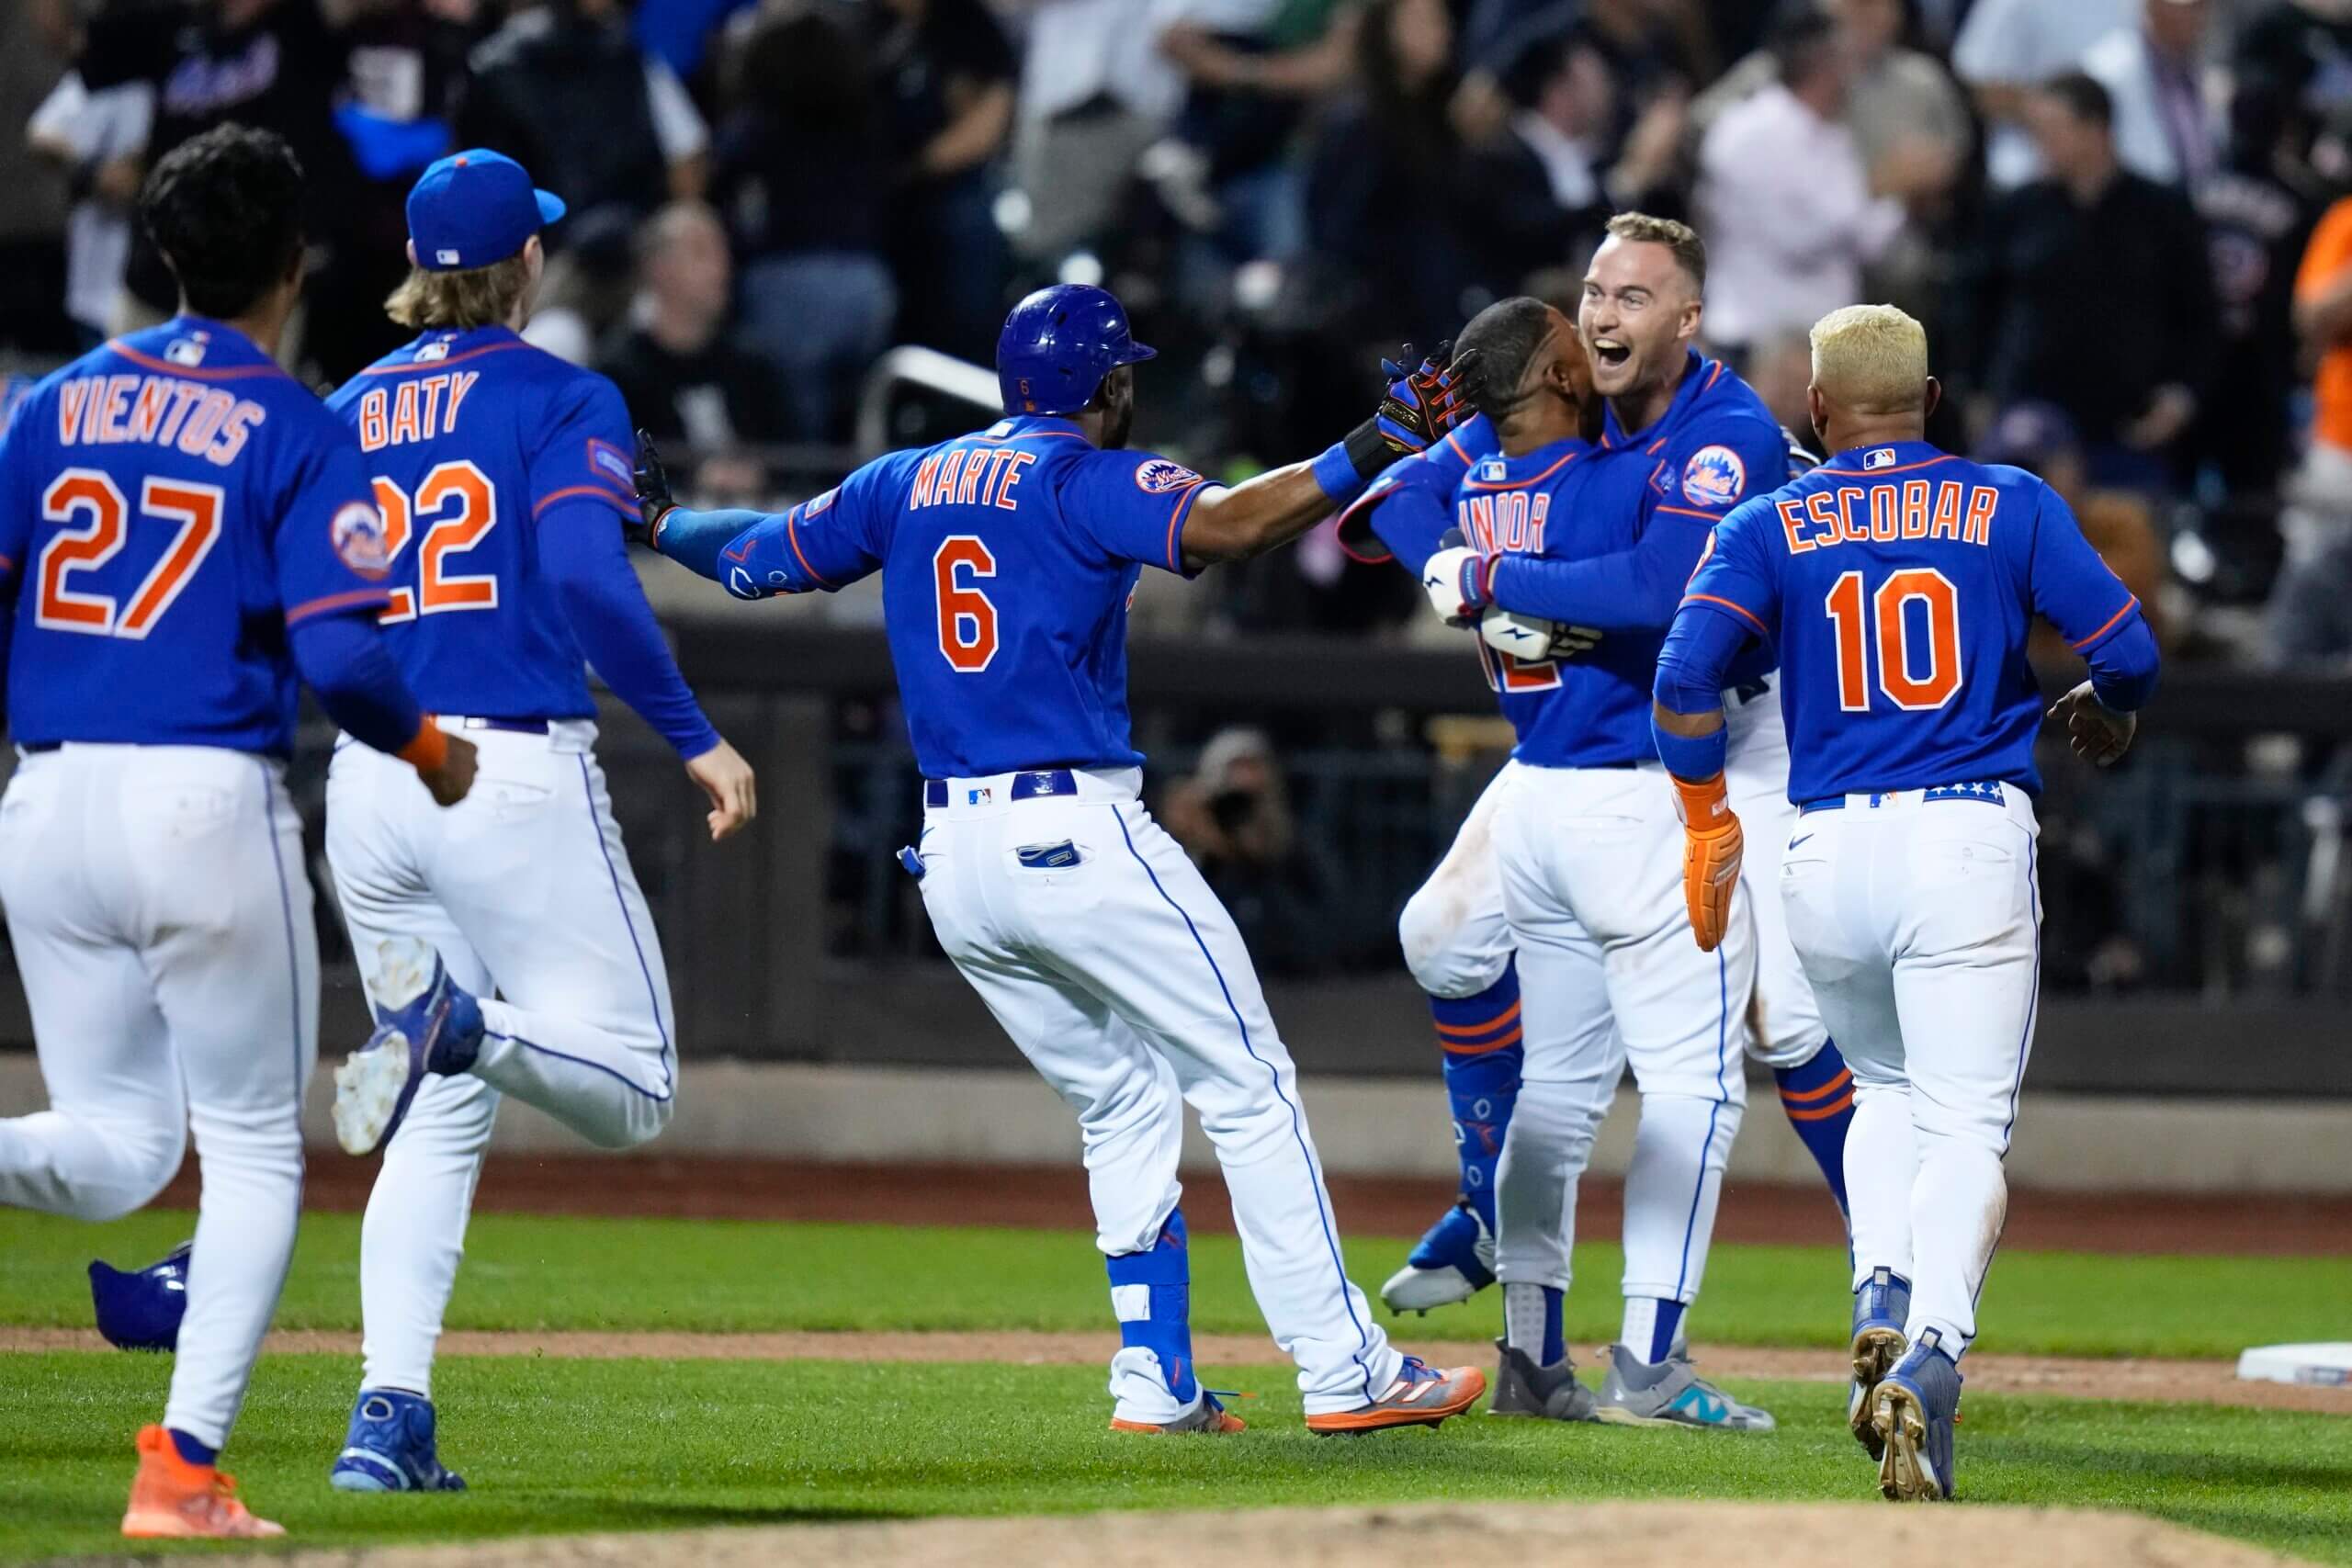 Starling Marte, NY Mets sweep Yankees with walk-off win at Citi Field